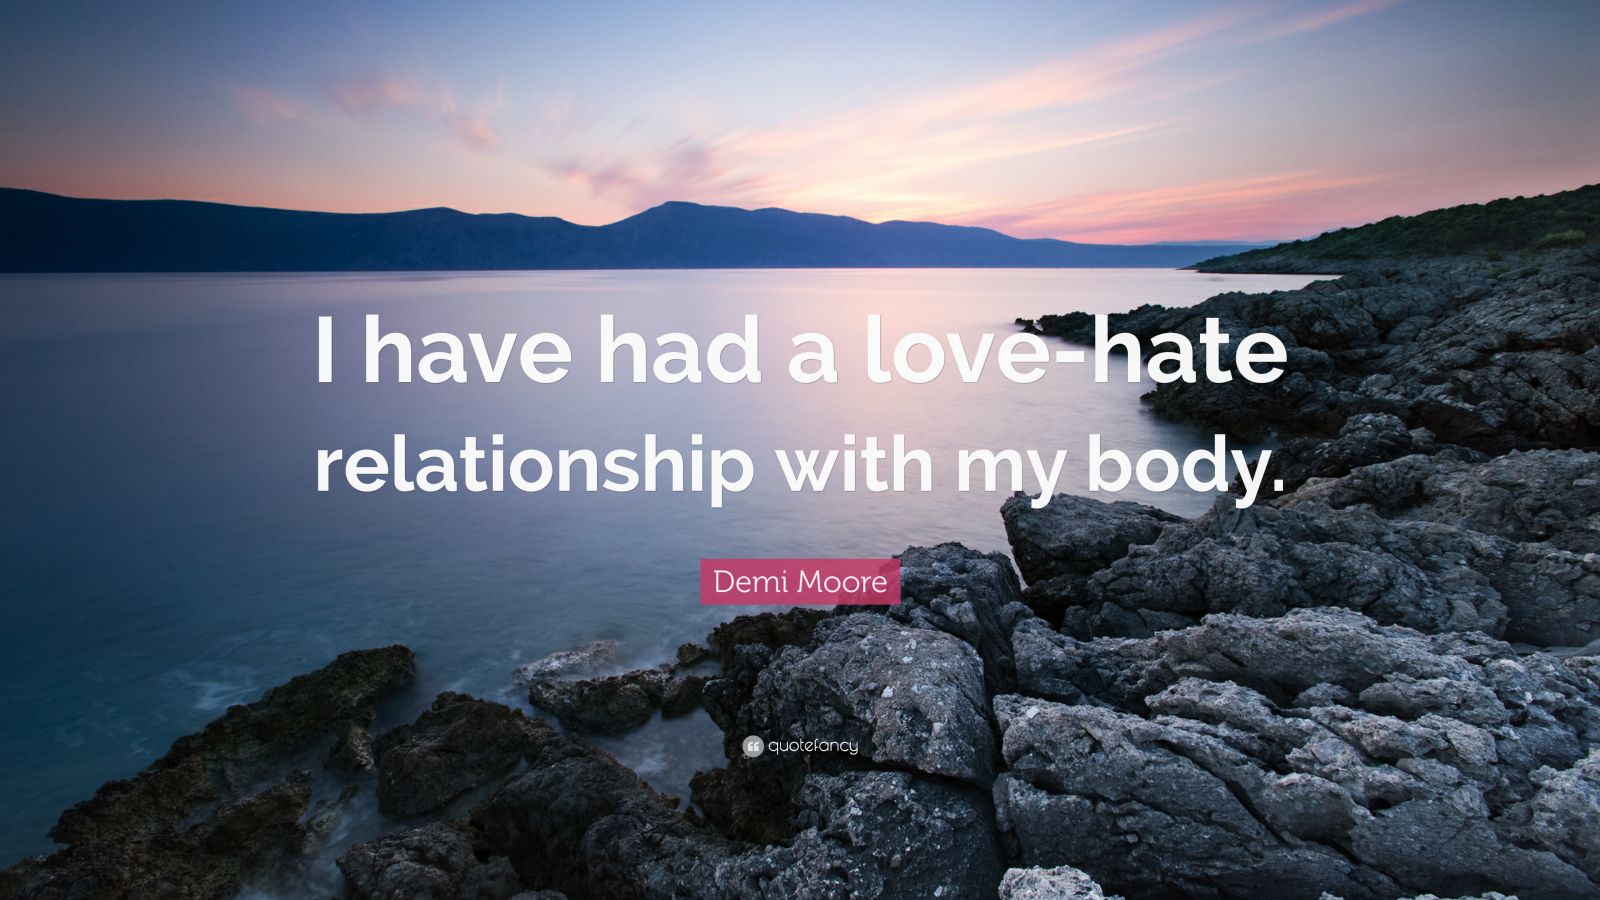 Demi Moore Quote: “I have had a love-hate relationship with my body.”